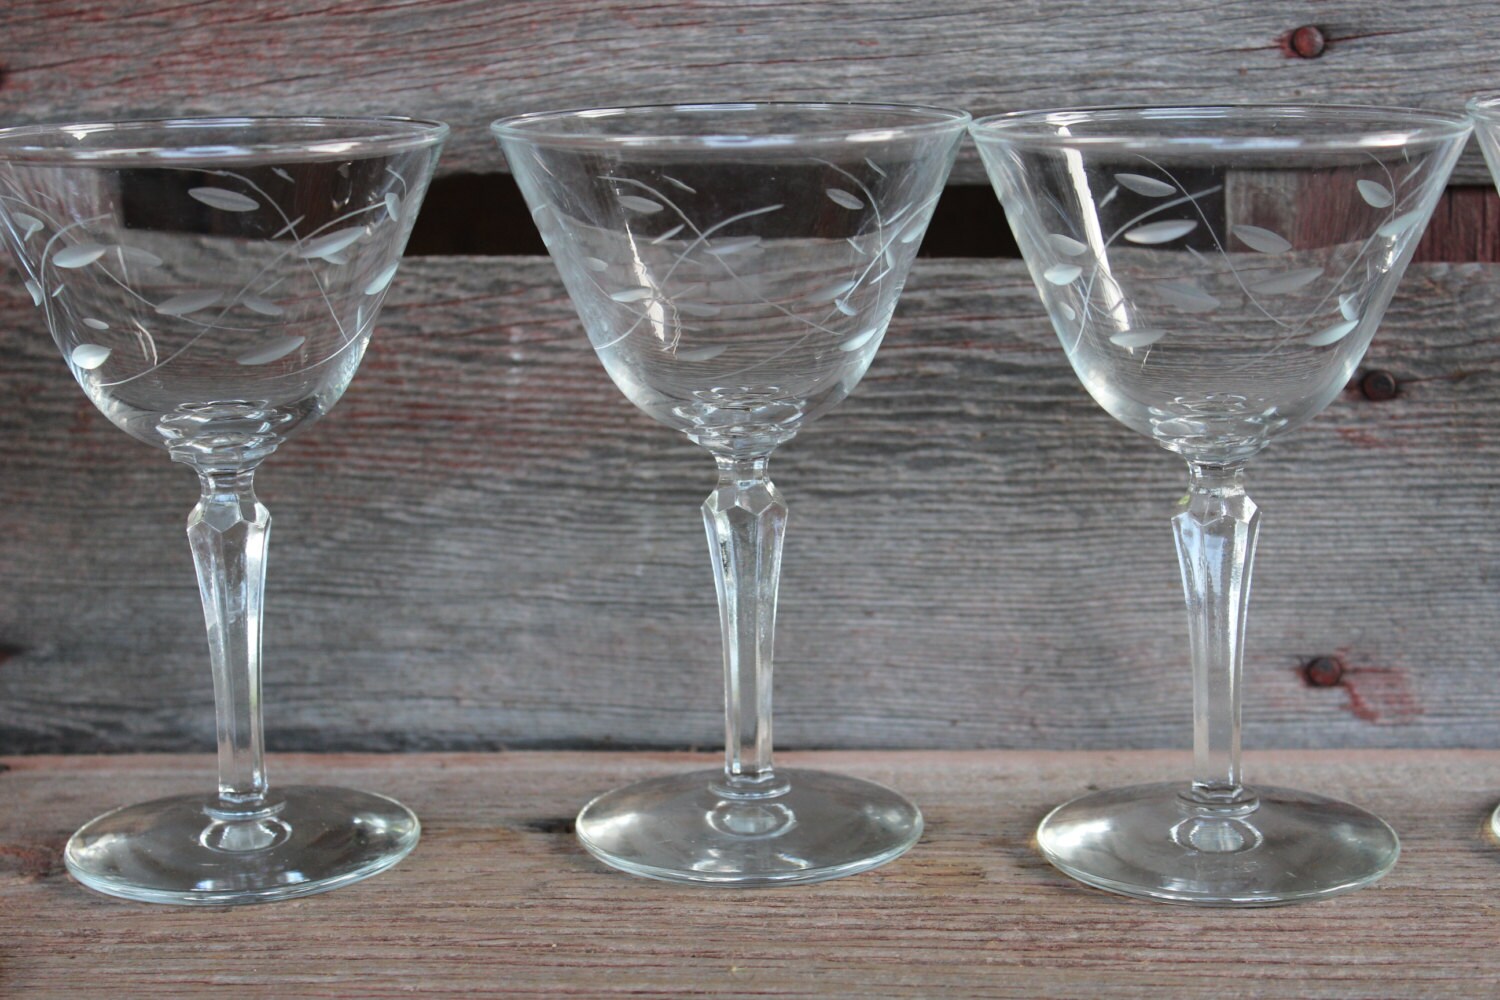 Etched martini glasses